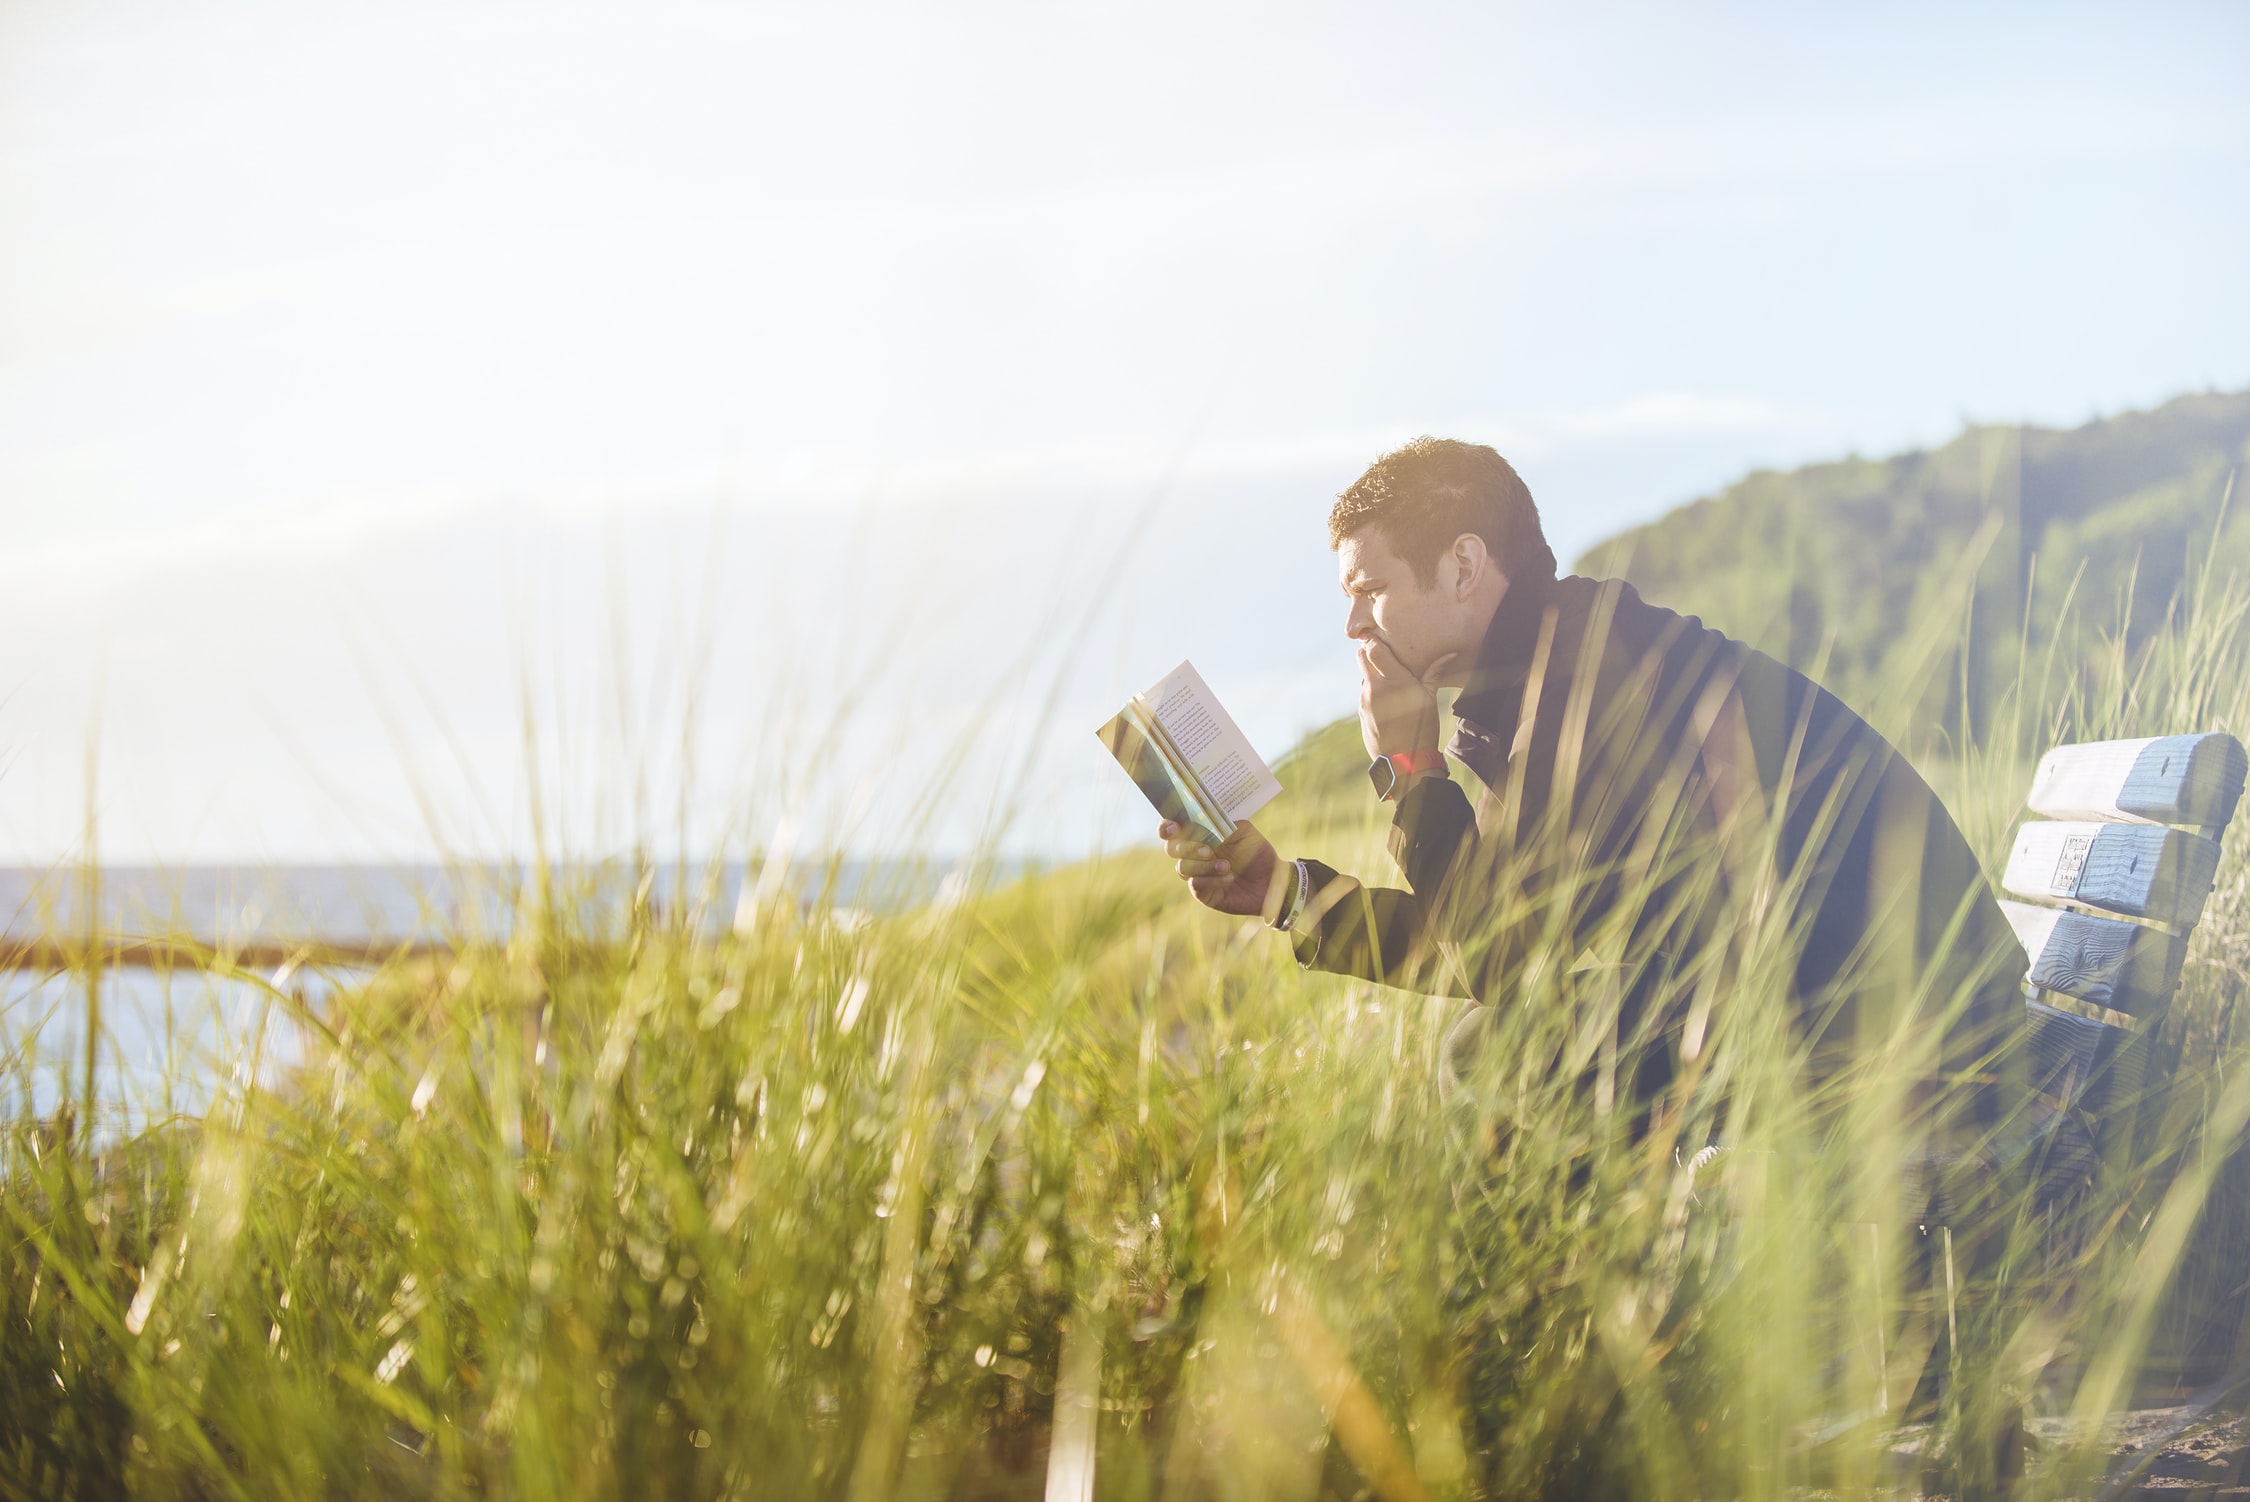 Man reading a book by the seaside, with alone with lots of green grass and mountains in the background